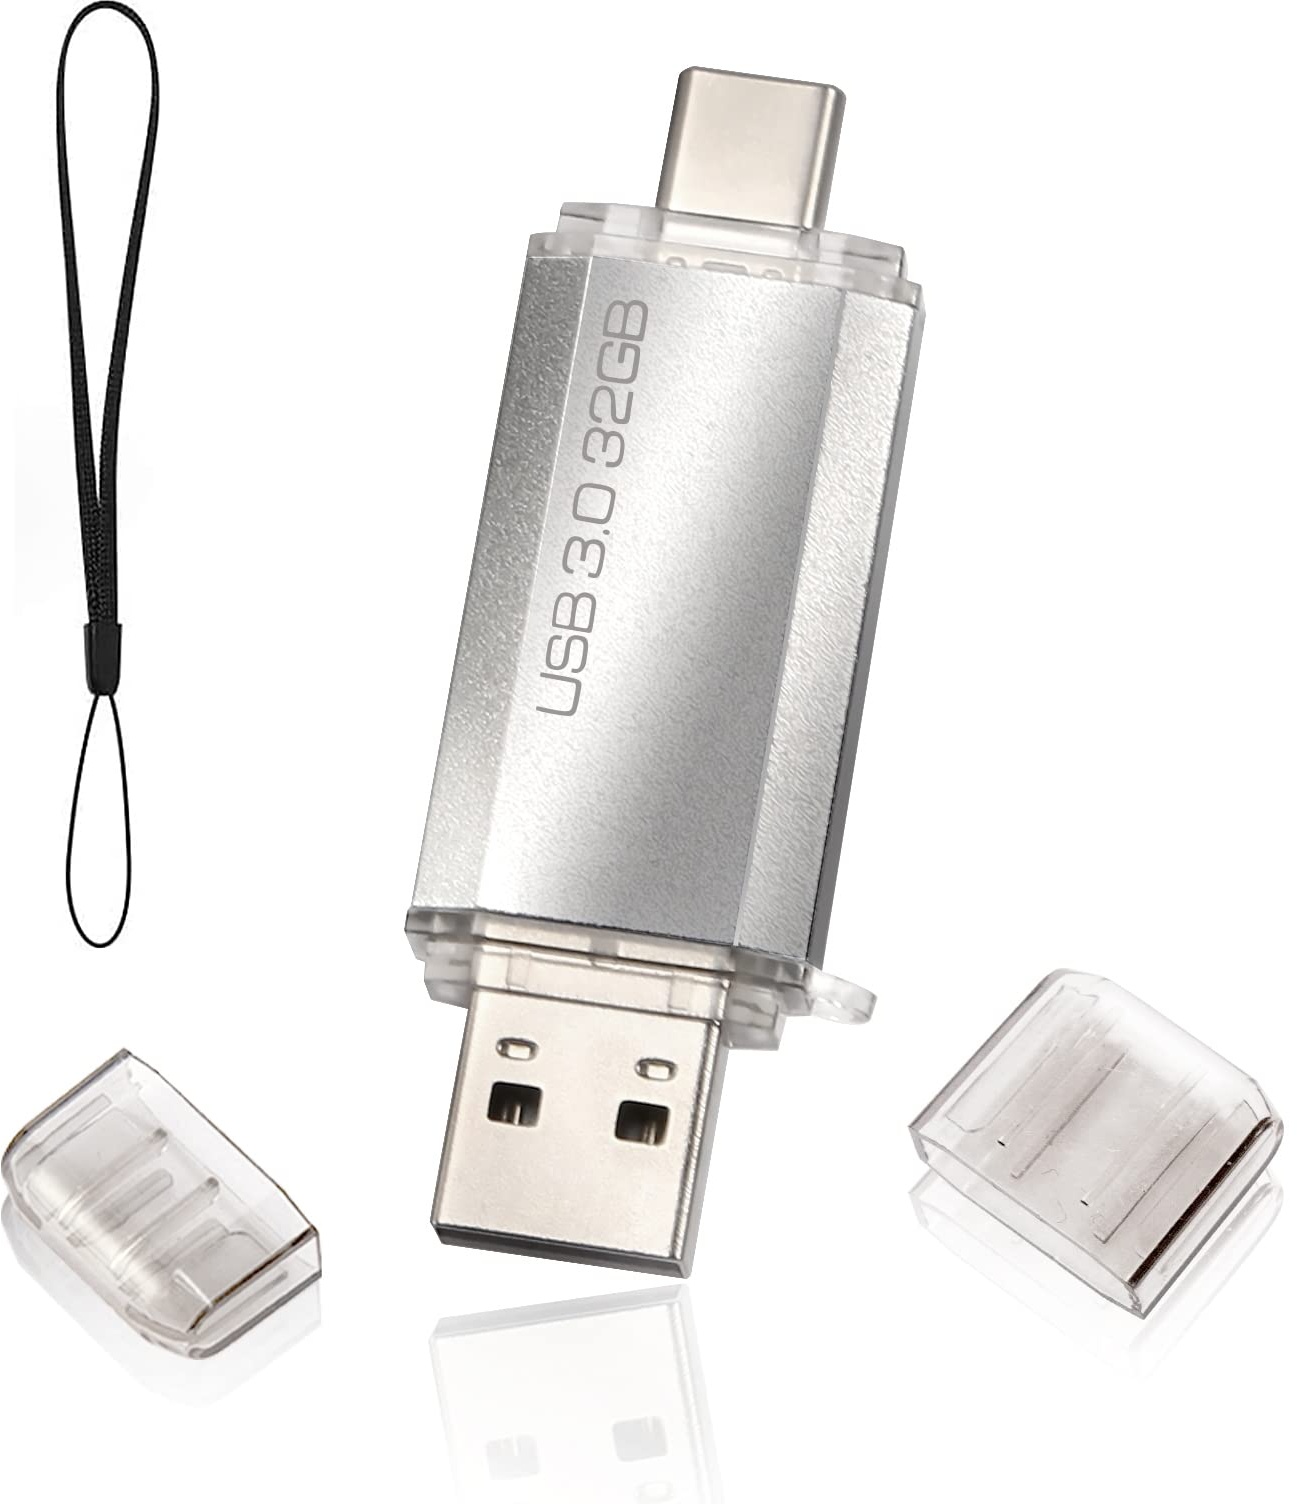 USB Stick 3.0 32 GB 2 in 1 USB Flash Drives USB 3.0 USB C Type C Memory Stick OTG Dual Flash Drive 2-in-1 Memory Stick for Tablet, PC, Android Mobile Phone (Samsung, Huawei, Honor, Xiaomi) Silver